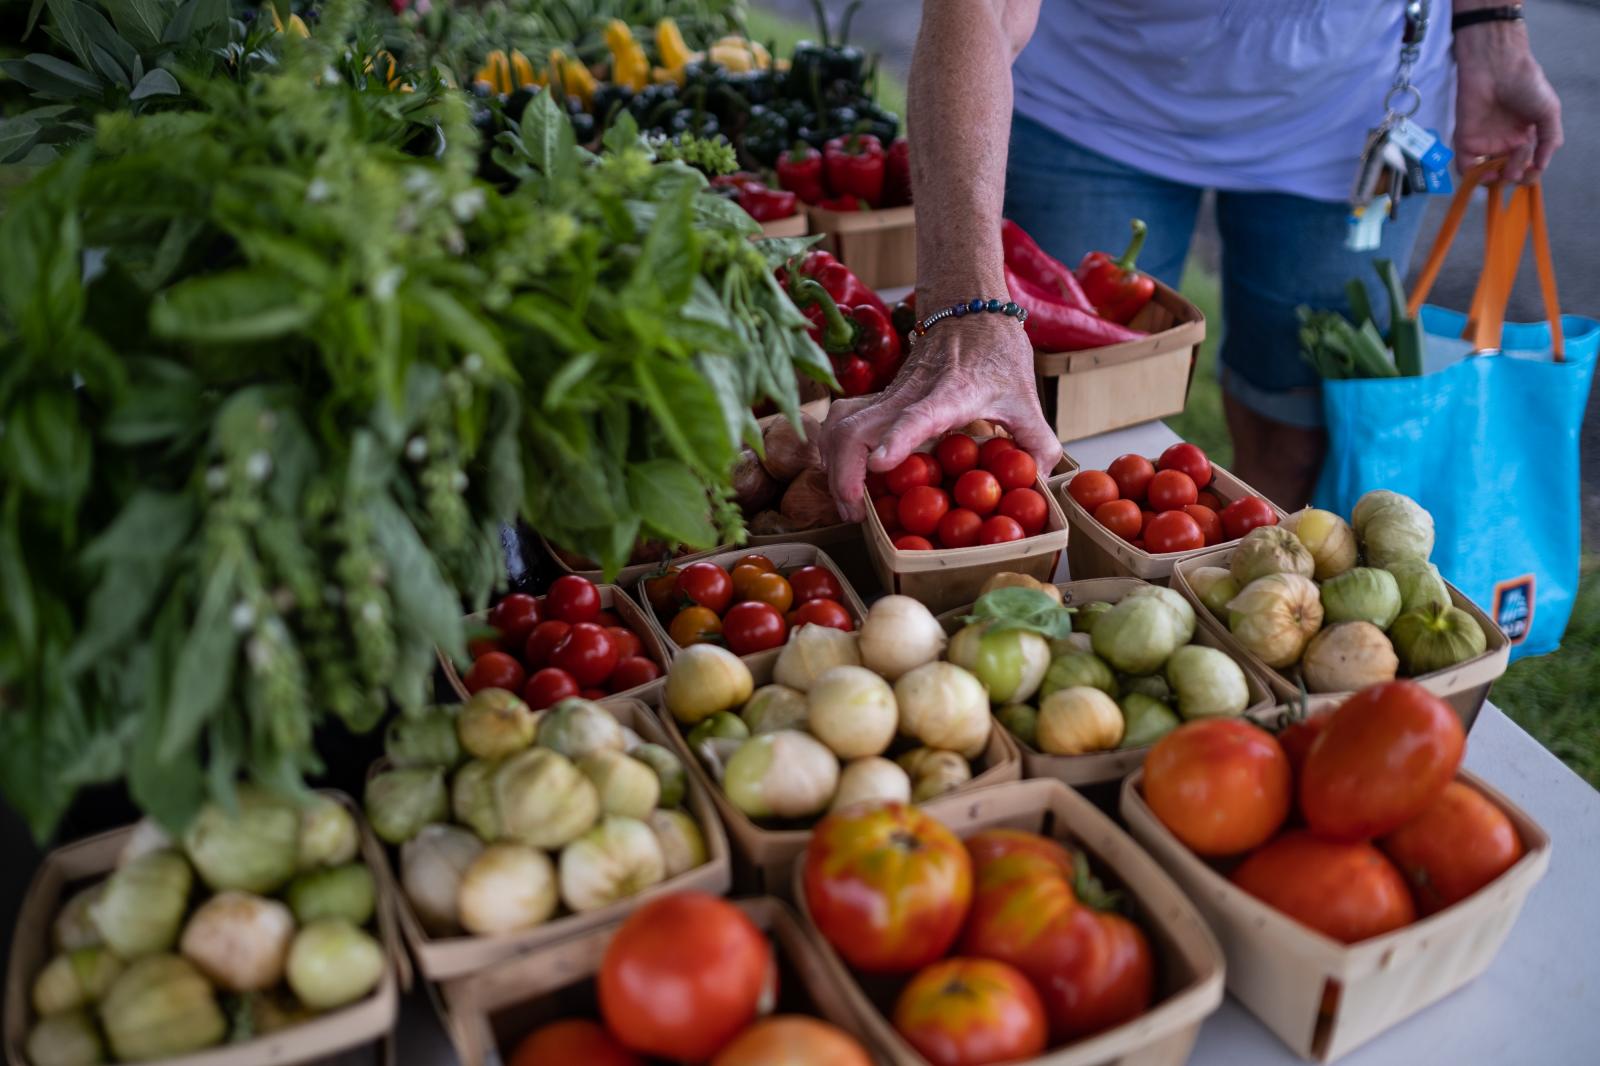 Image from Brady Family Farm - A farm stand visitor picks tomatoes to purchase.